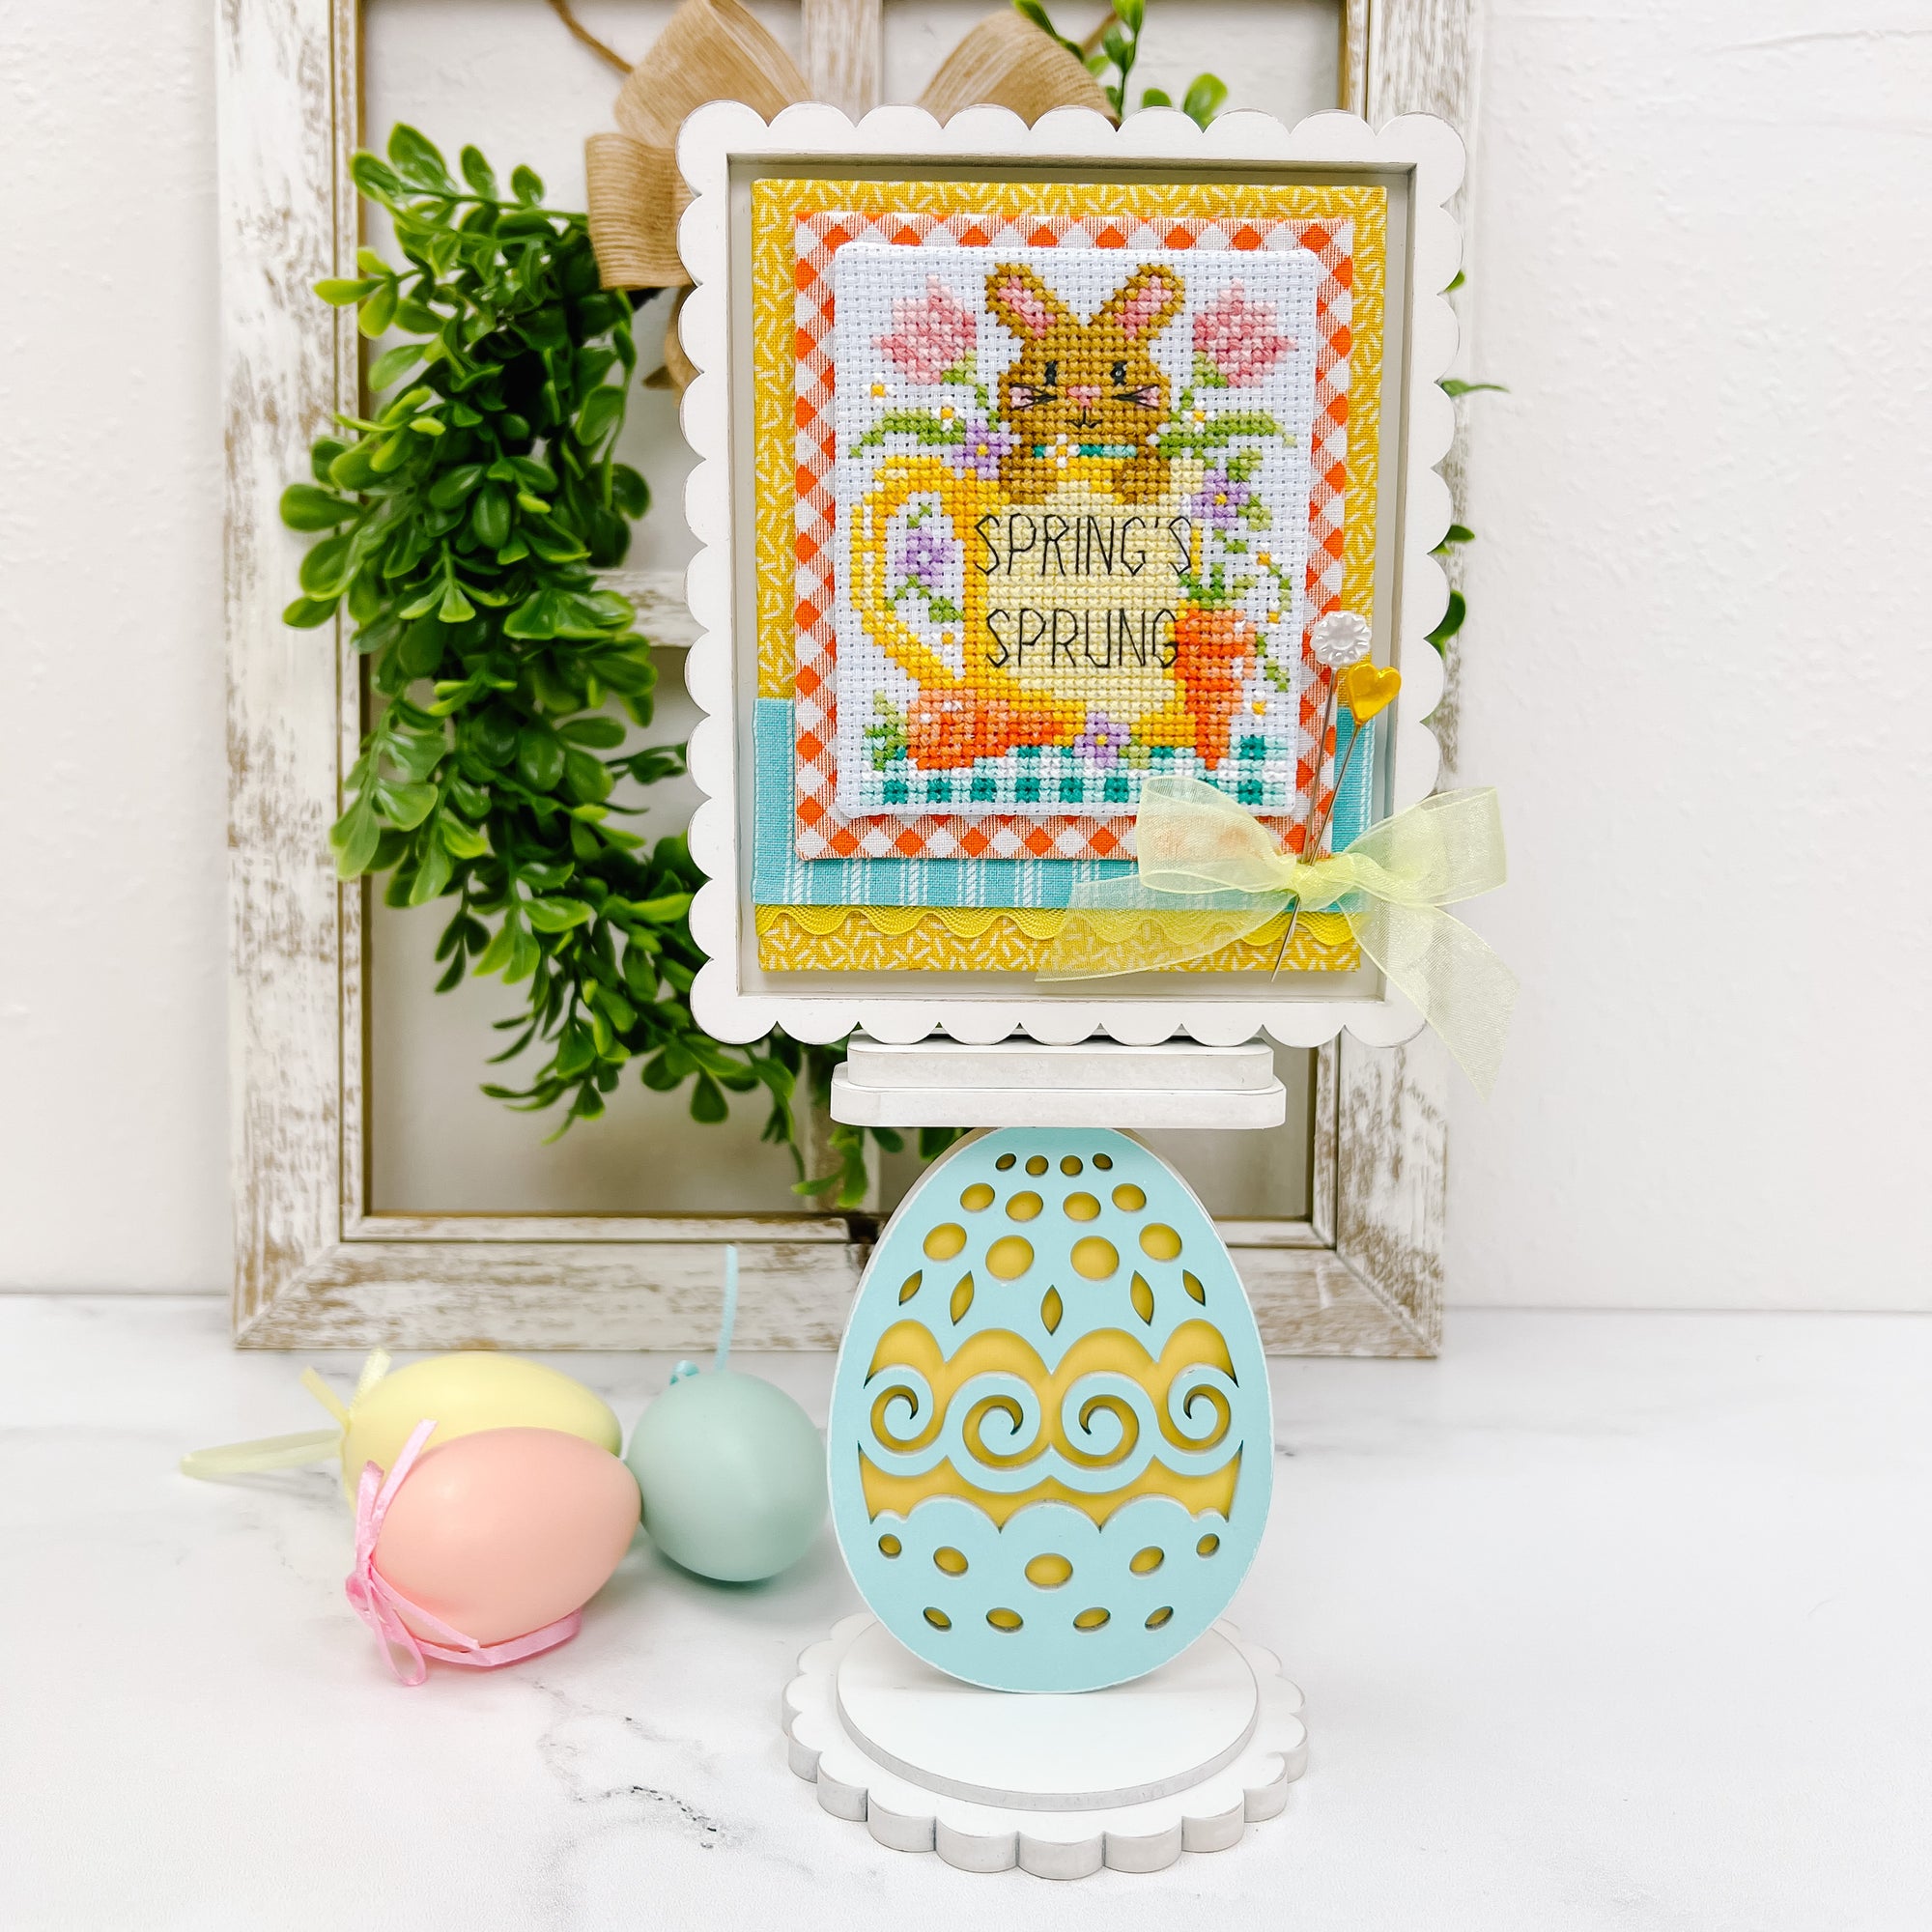 Egg shaped pedestal cross stitch display with a finished cross stitch by Shannon Christine Designs